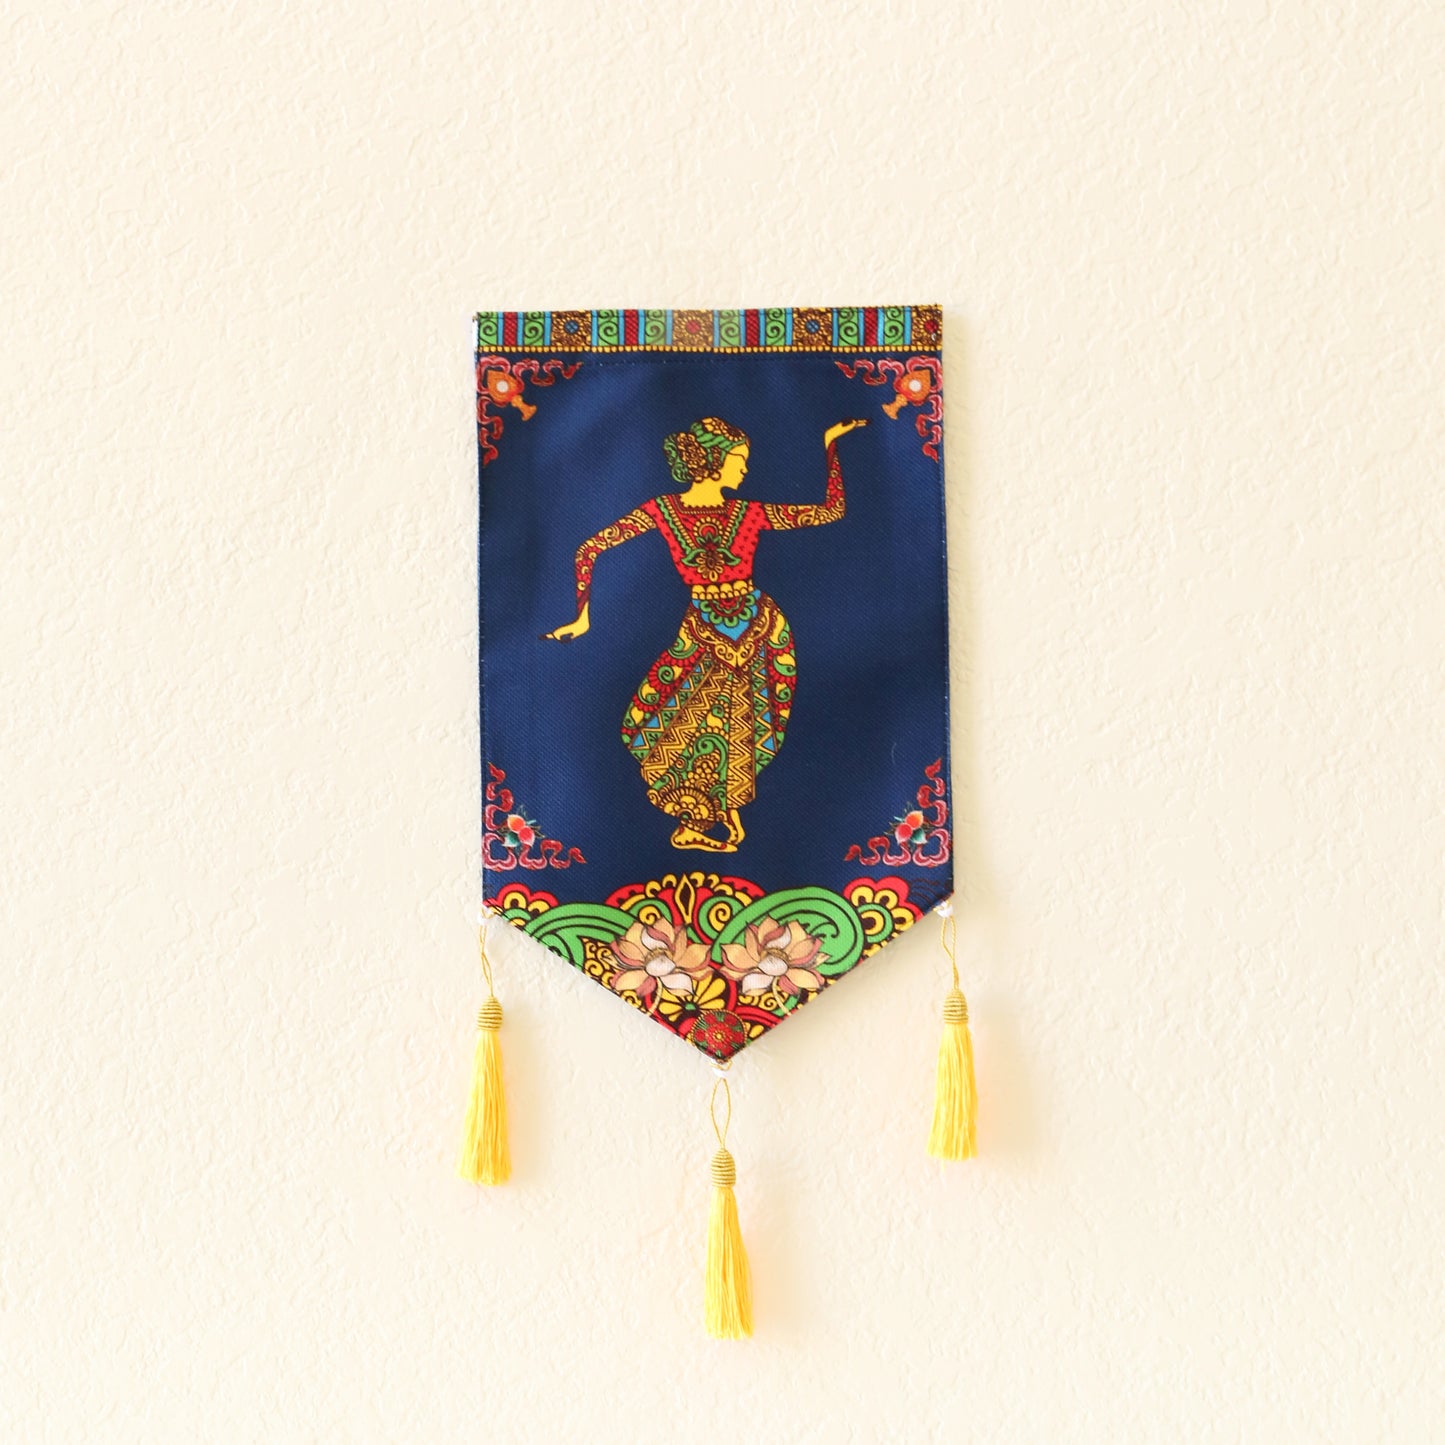 Thai Style Buddhist Om Symbol Small Canvas Tapestry Wall Hanging Tassels, 9.5"X16", Asian Chinese Art